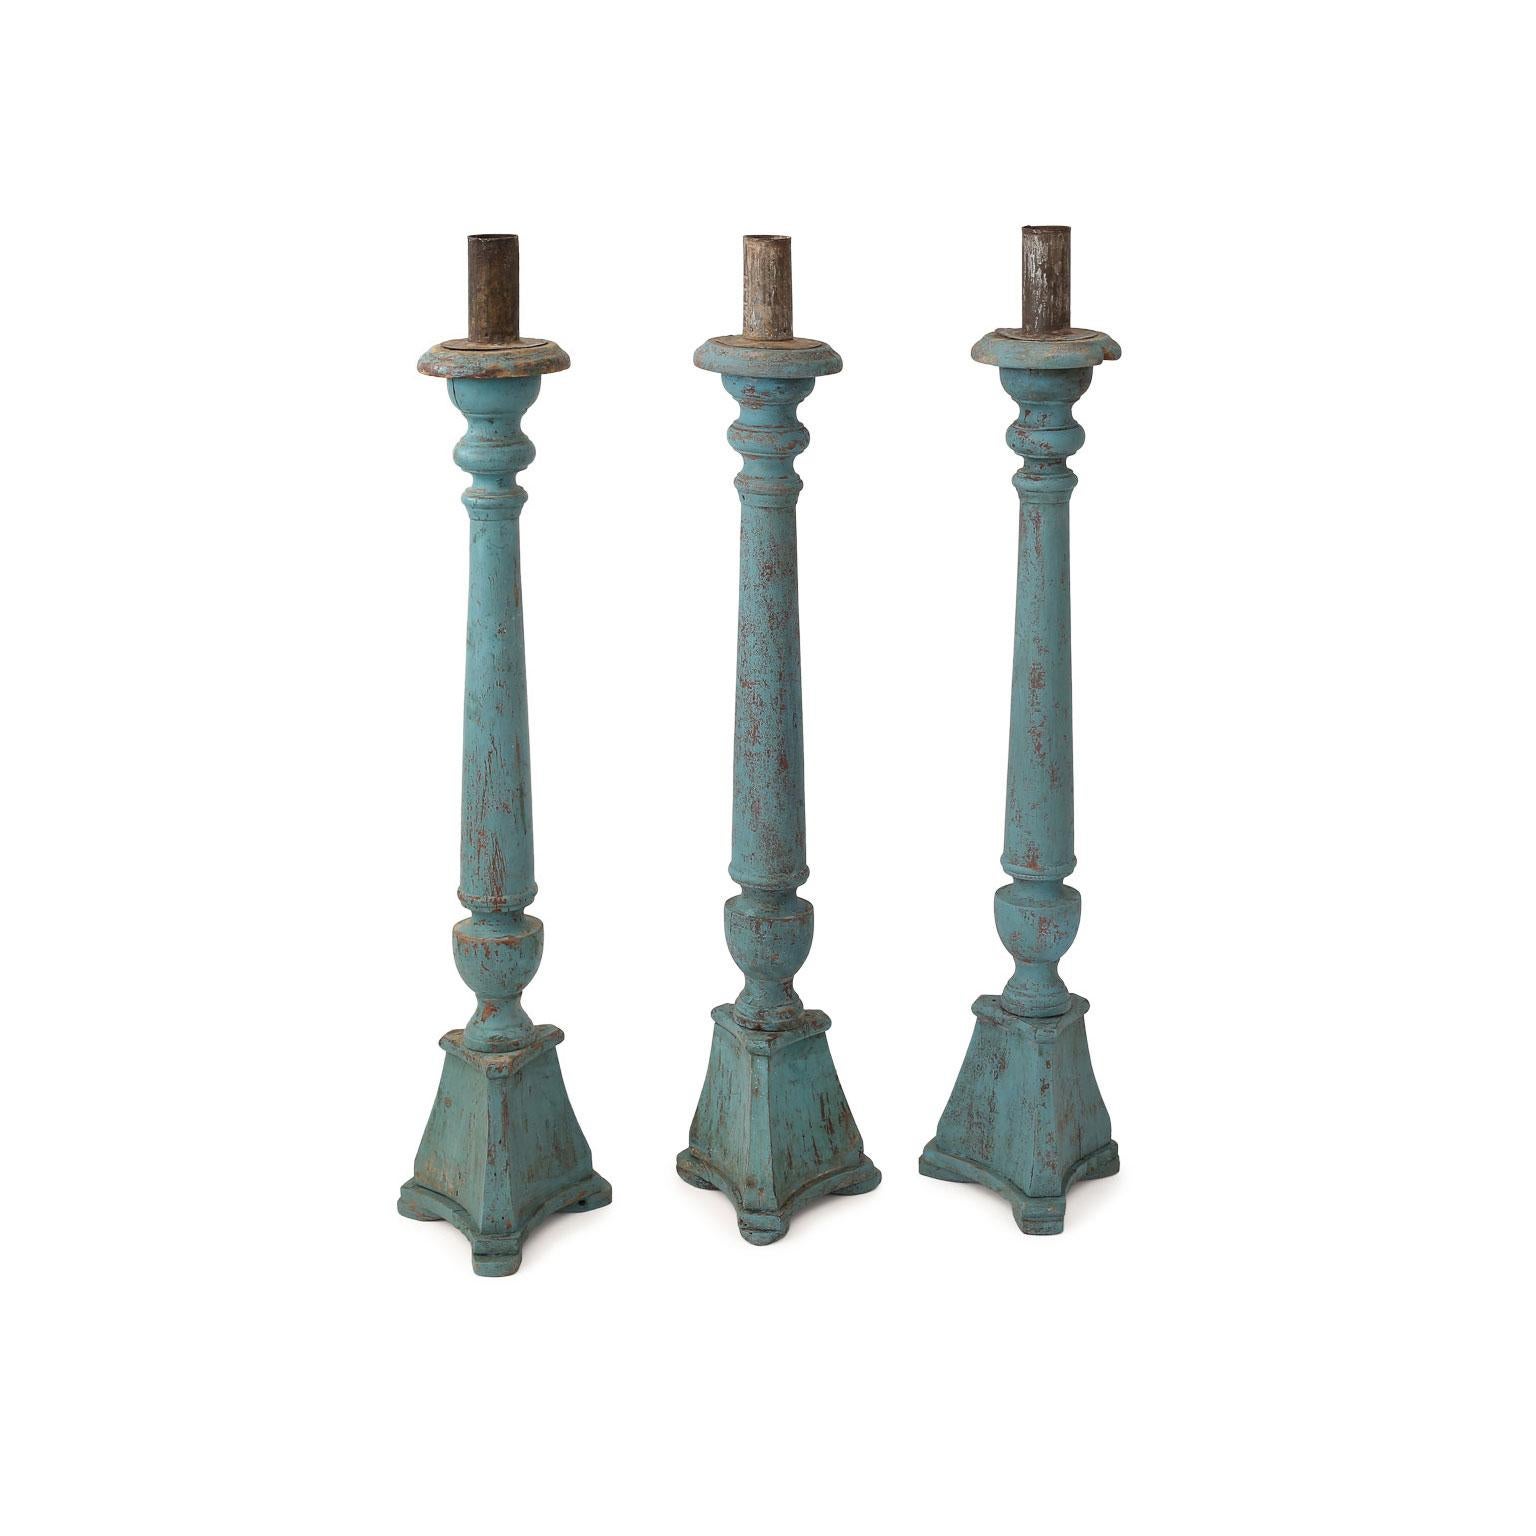 Vintage teal-blue painted candlestick, hand-carved from Spain. Topped with a tole candle-holder. Three available. Priced and sold individually $450 each. Height varies between 32 to 33.5 inches. Width 6.5 inches x Depth 6.5 inches.